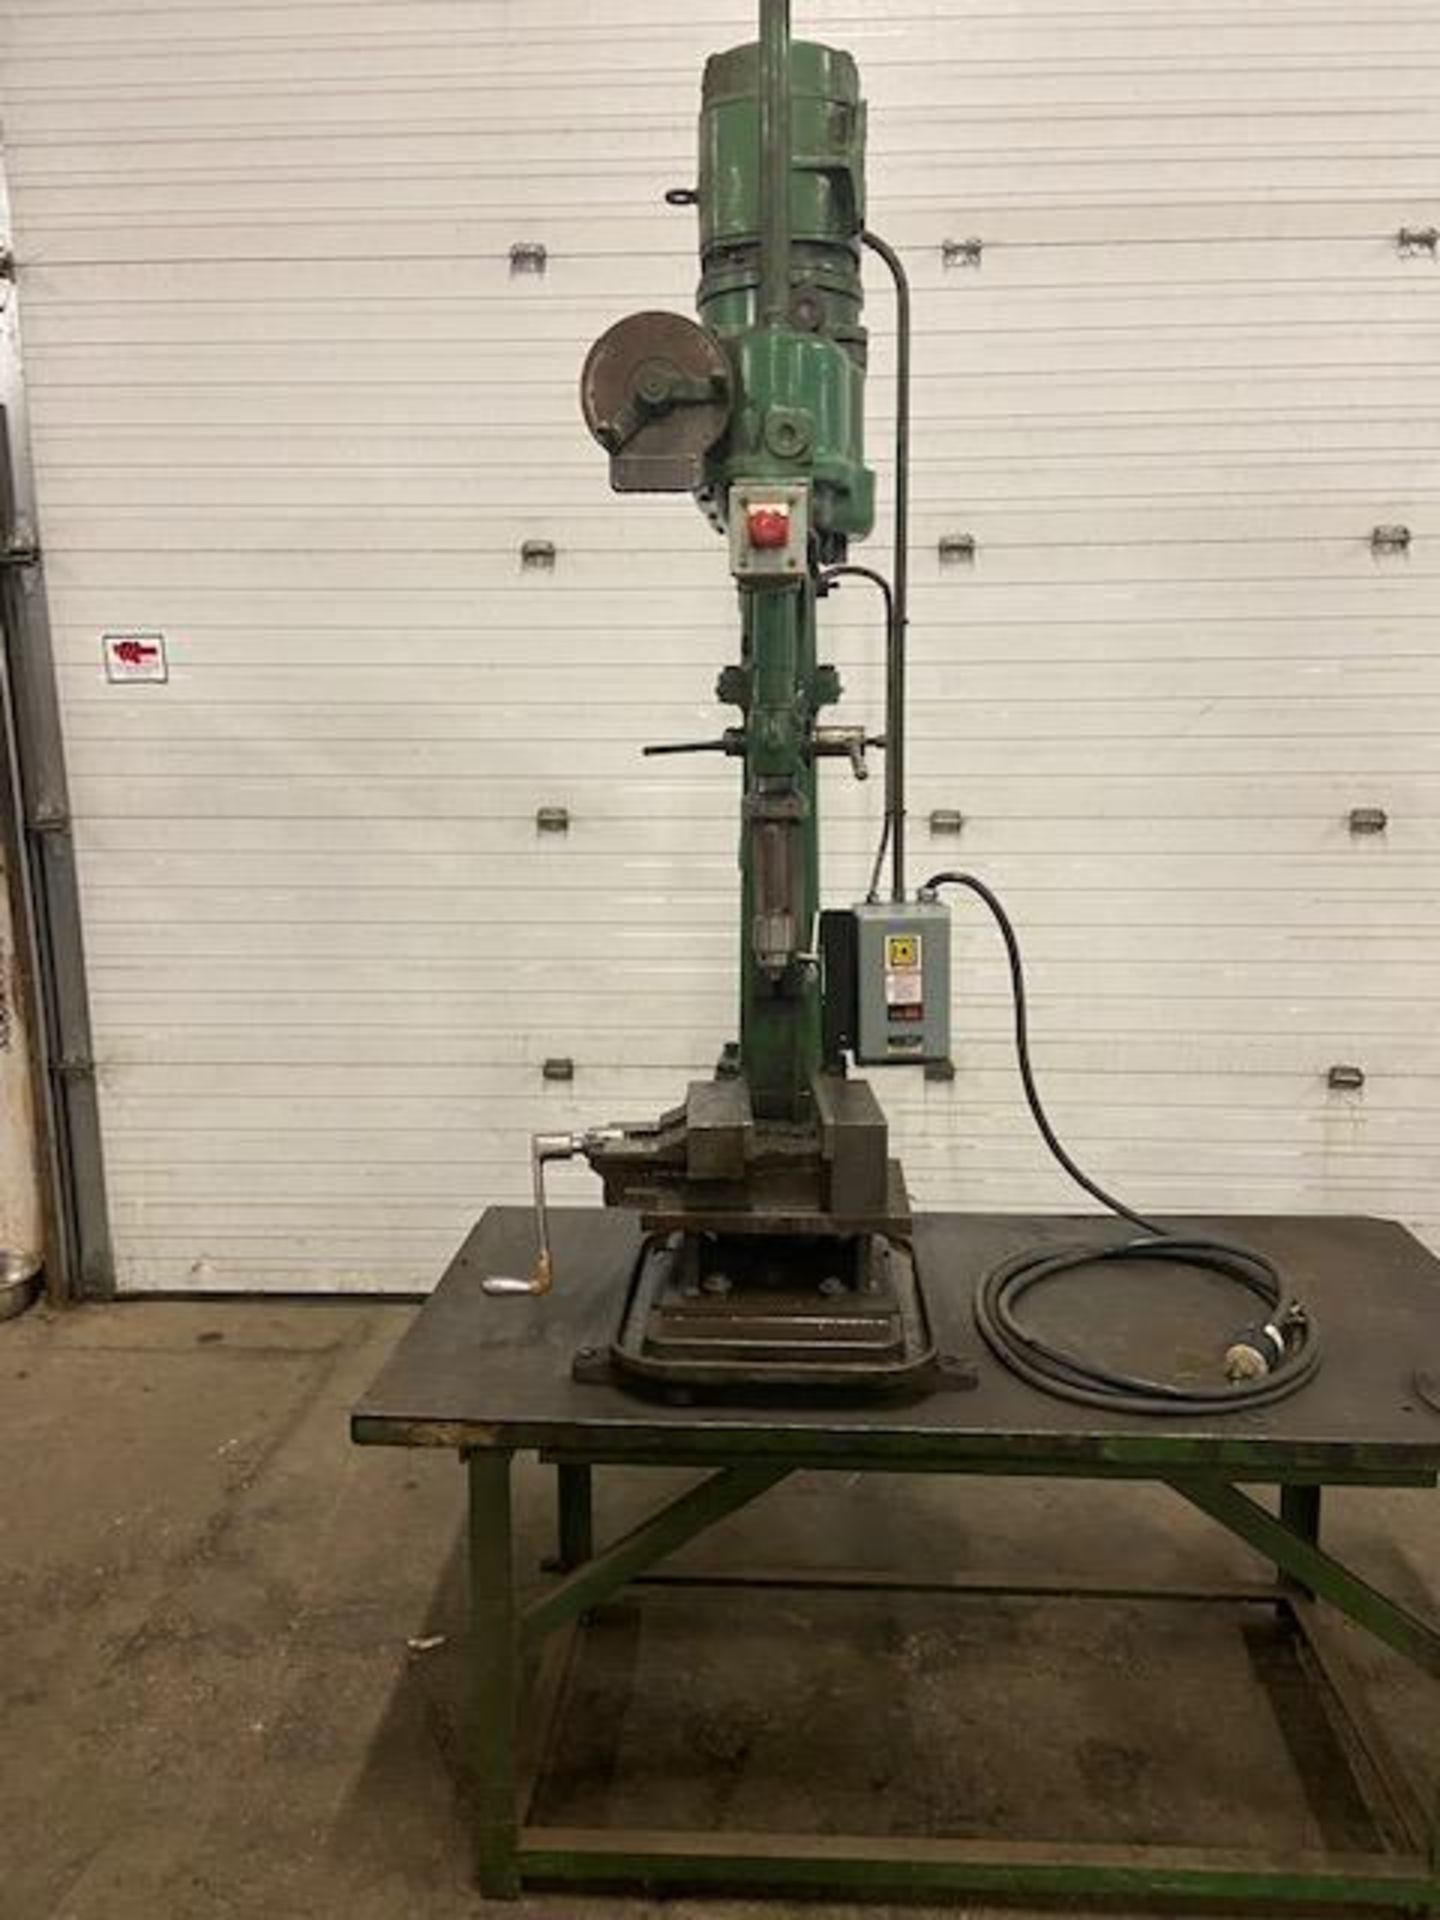 Fredk Pollard Gear Head Drill Press with adjustable table and Square D Breaker